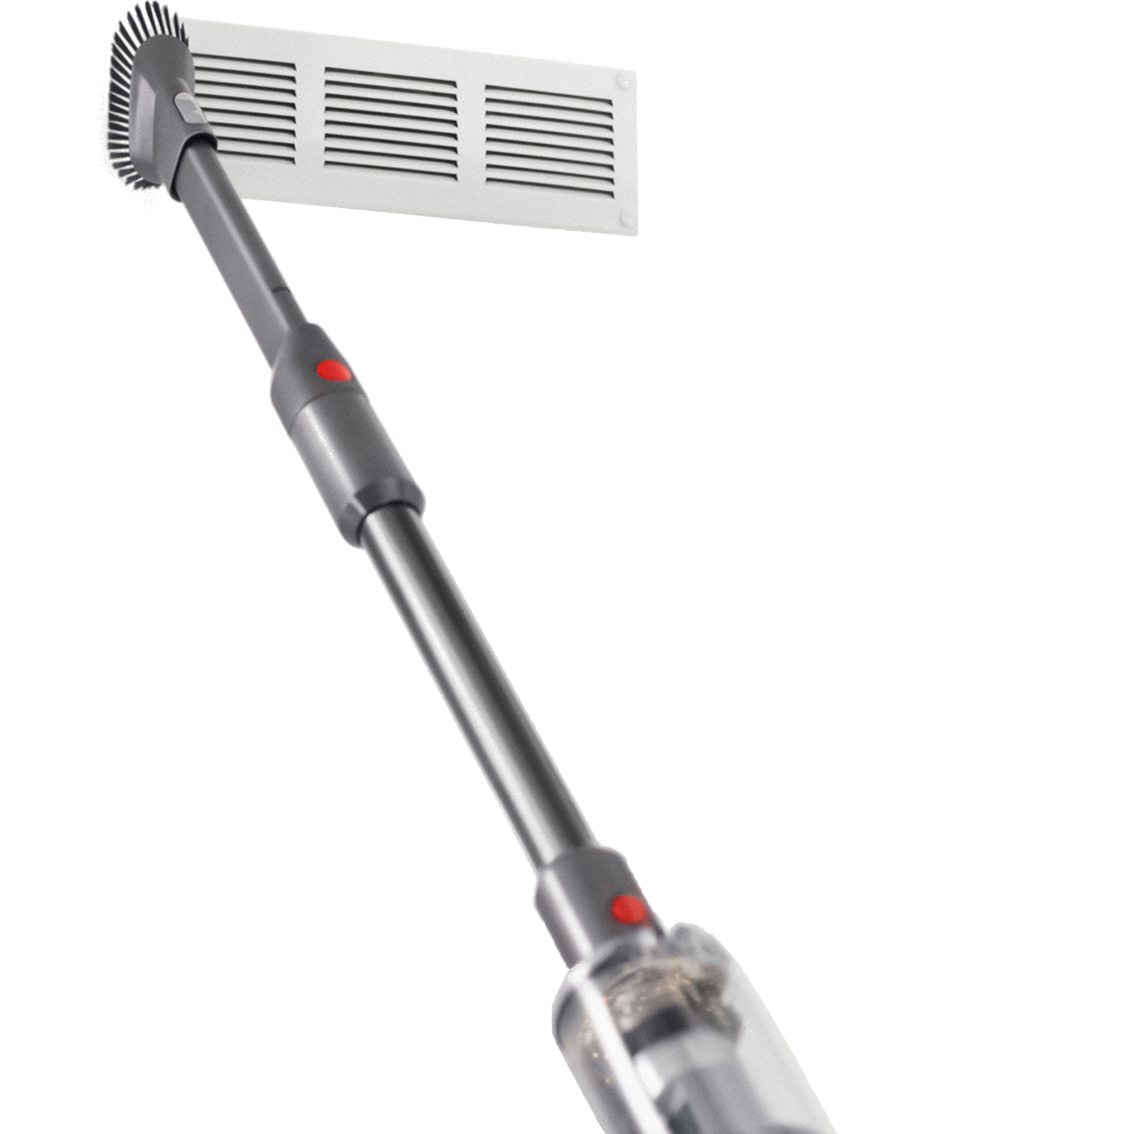 Dyson Omni Glide Cordless Vacuum Cleaner - Image 8 of 8